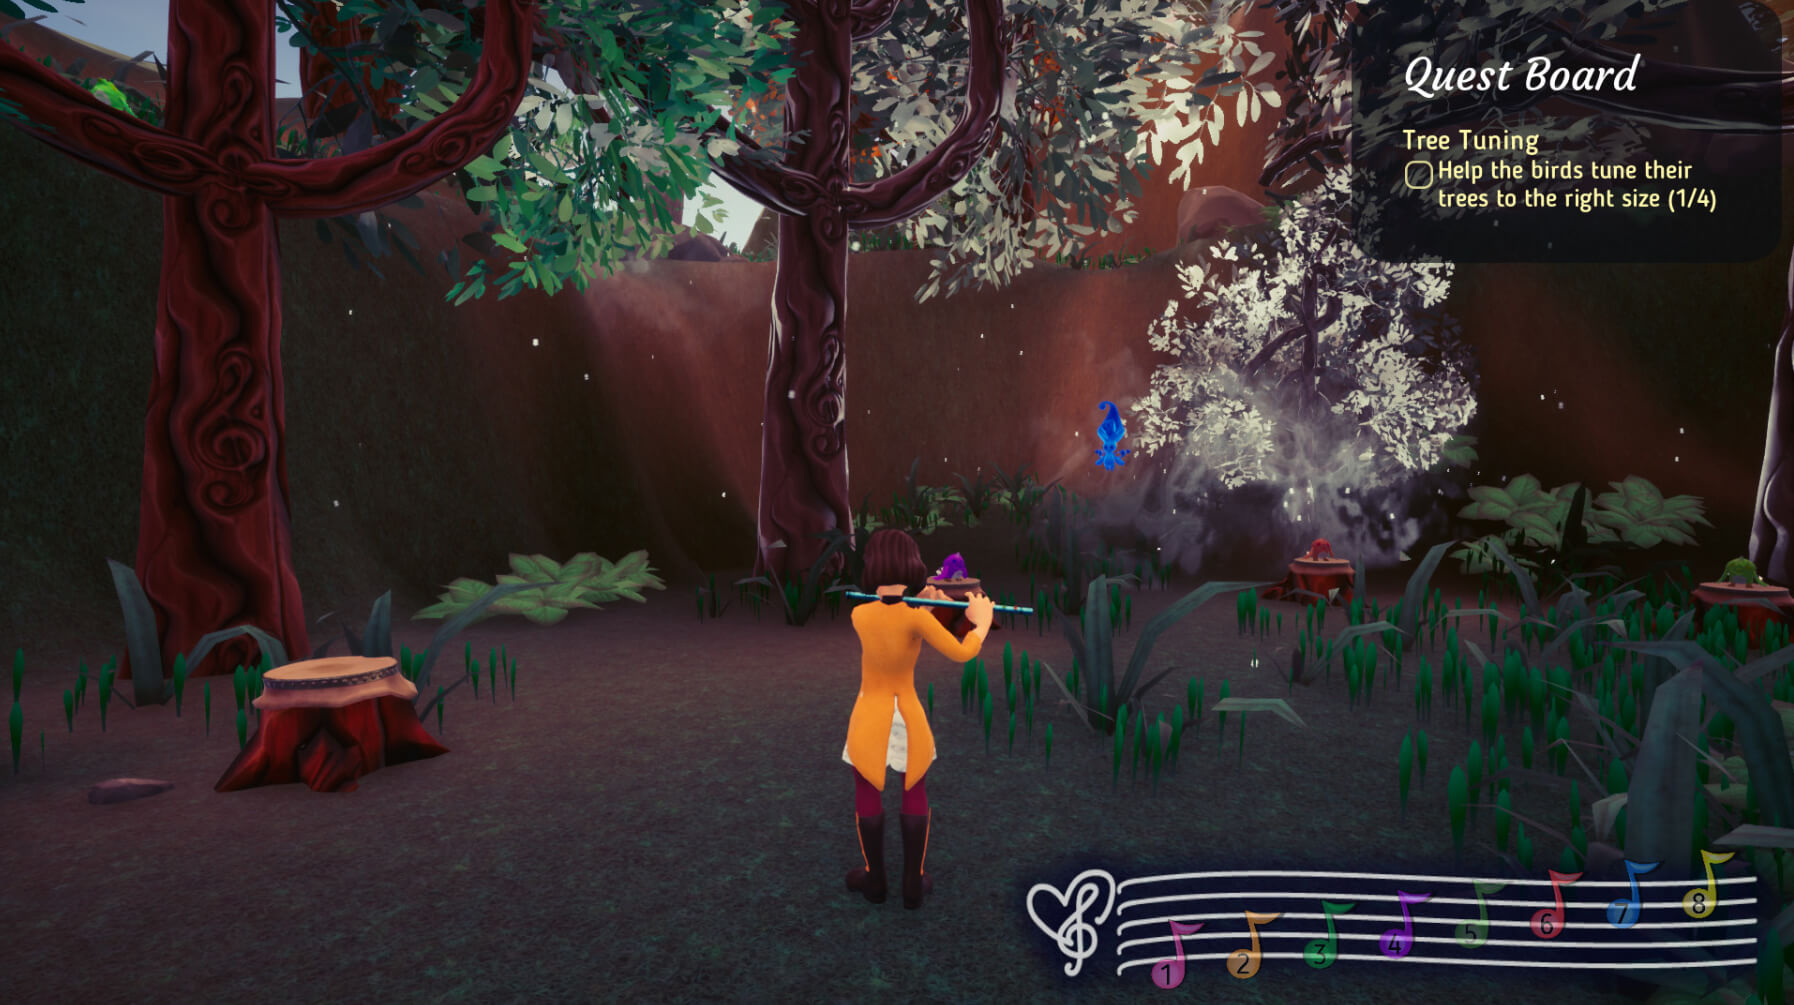 Renatta from the game Lirica plays flute to help magically resize trees.